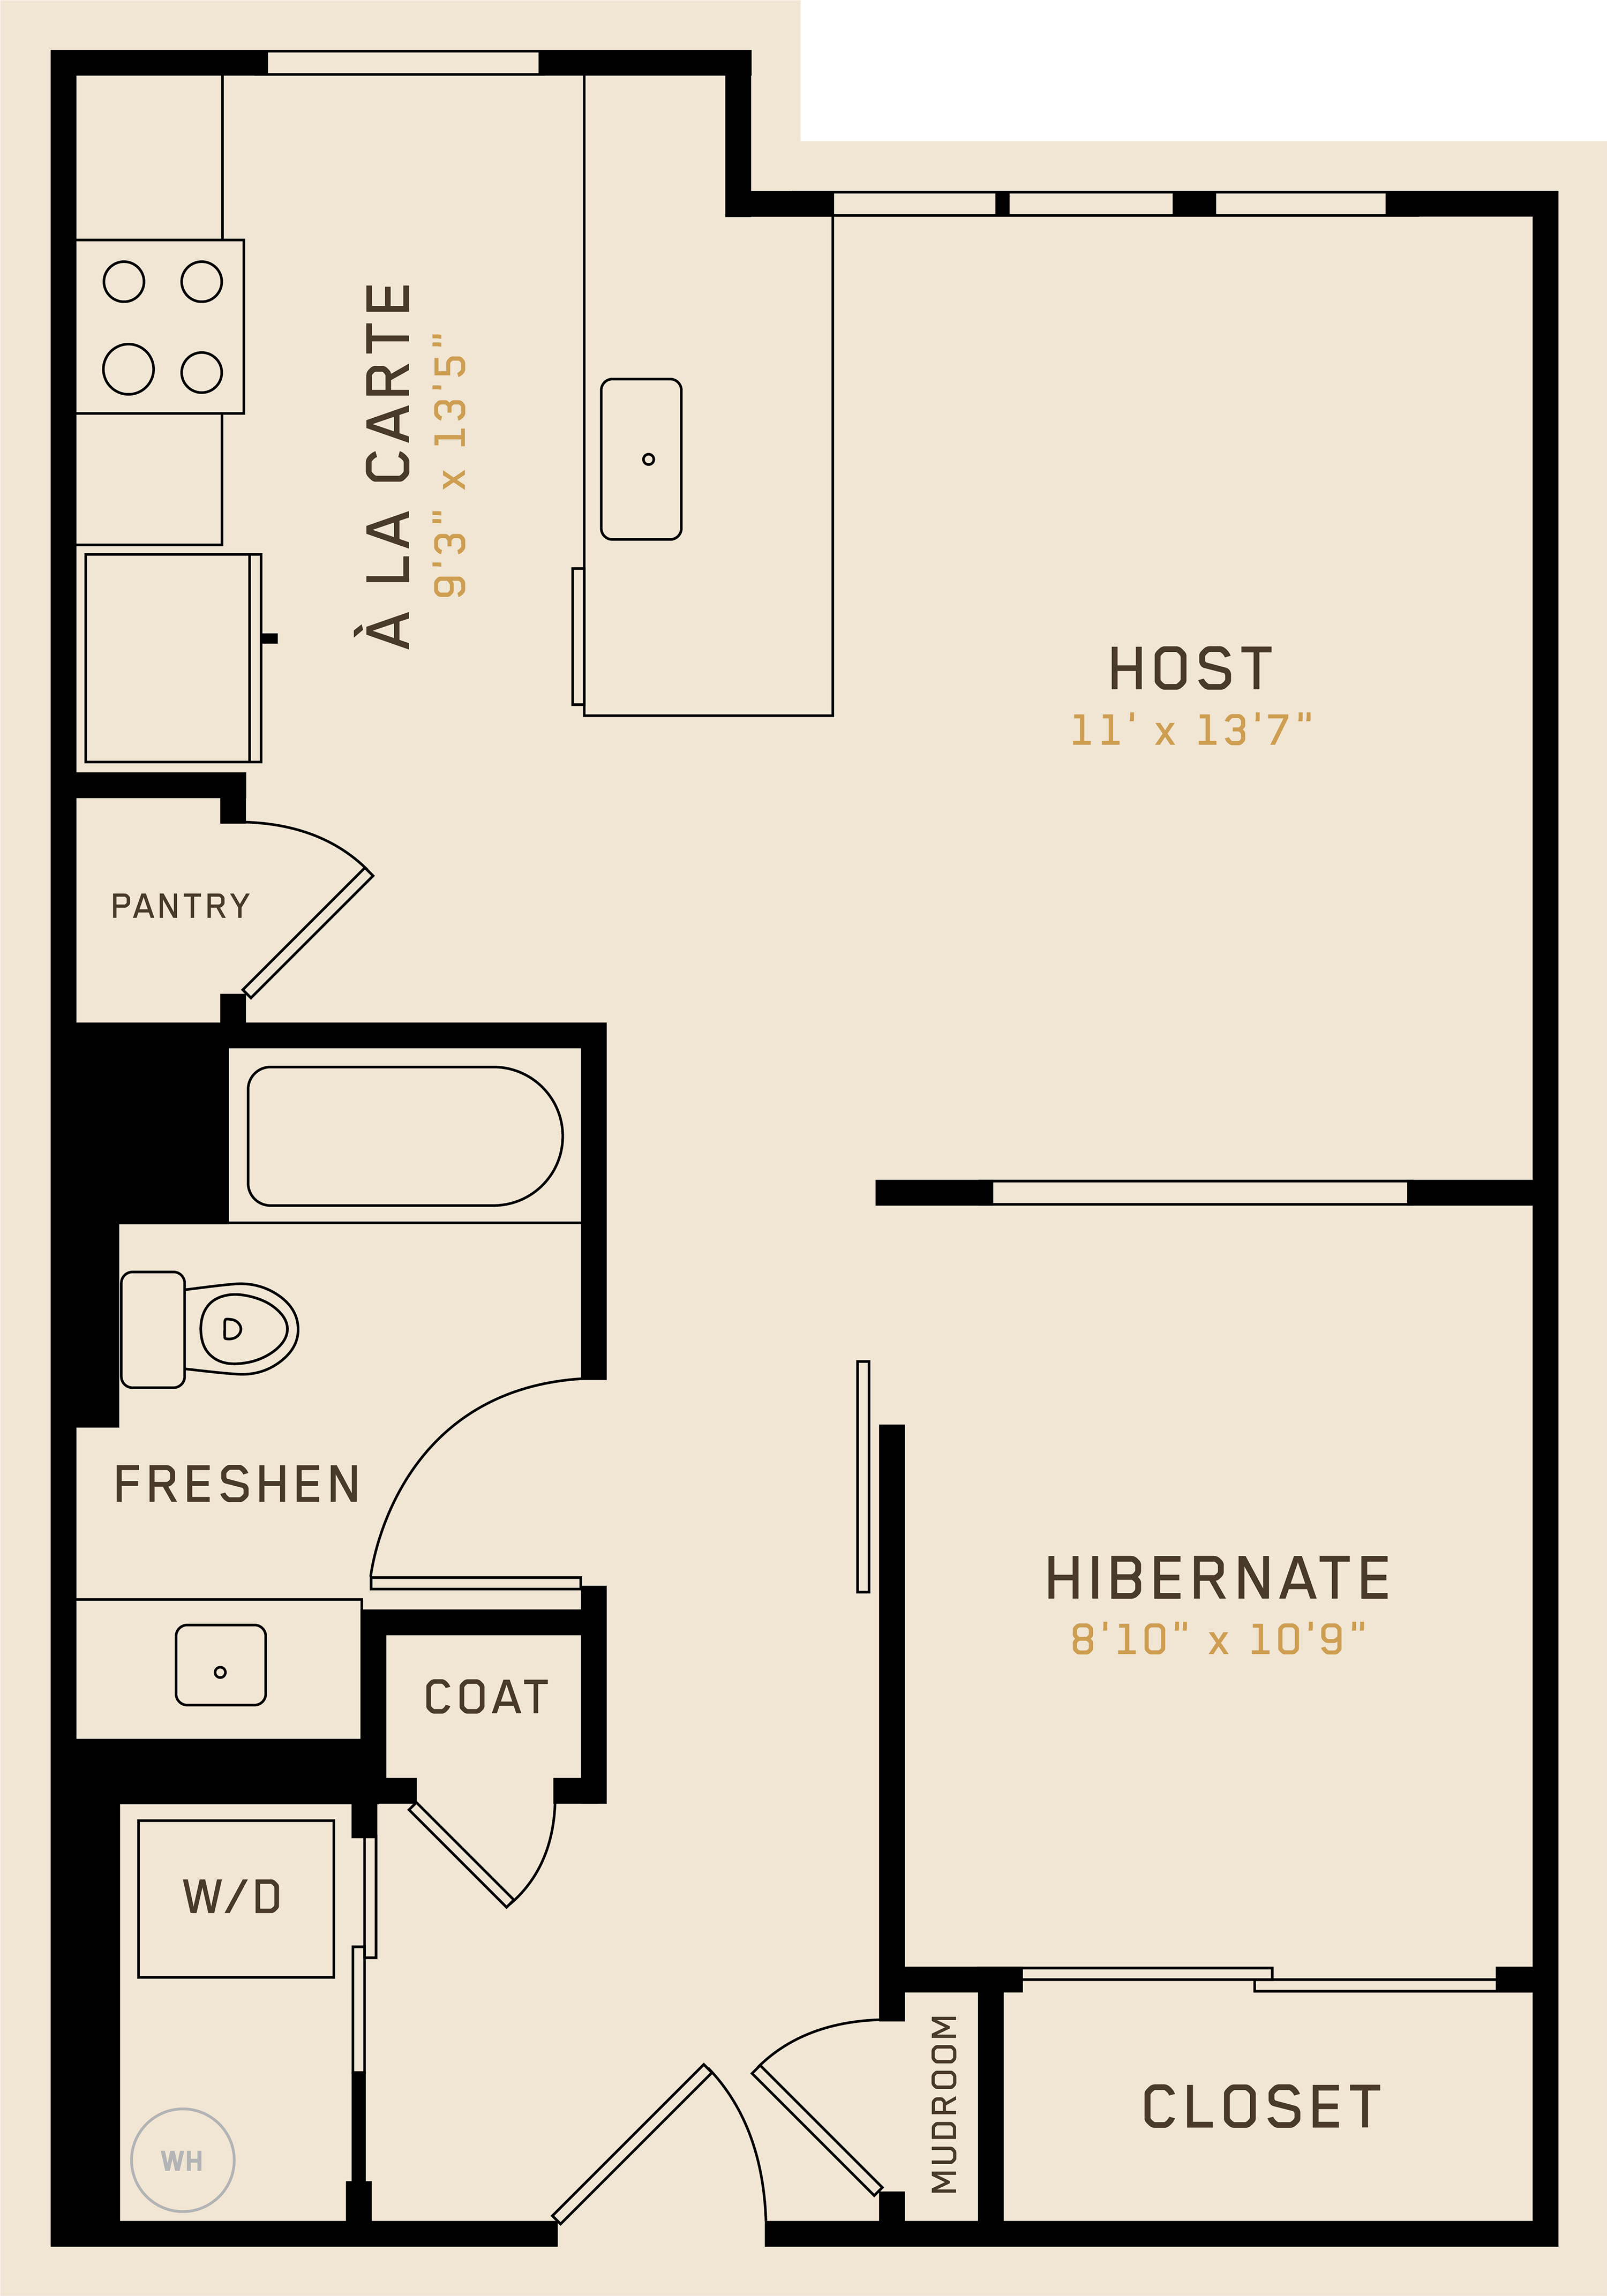 A1G floor plan featuring 1 bedroom, 1 bathroom, and is 652 square feet